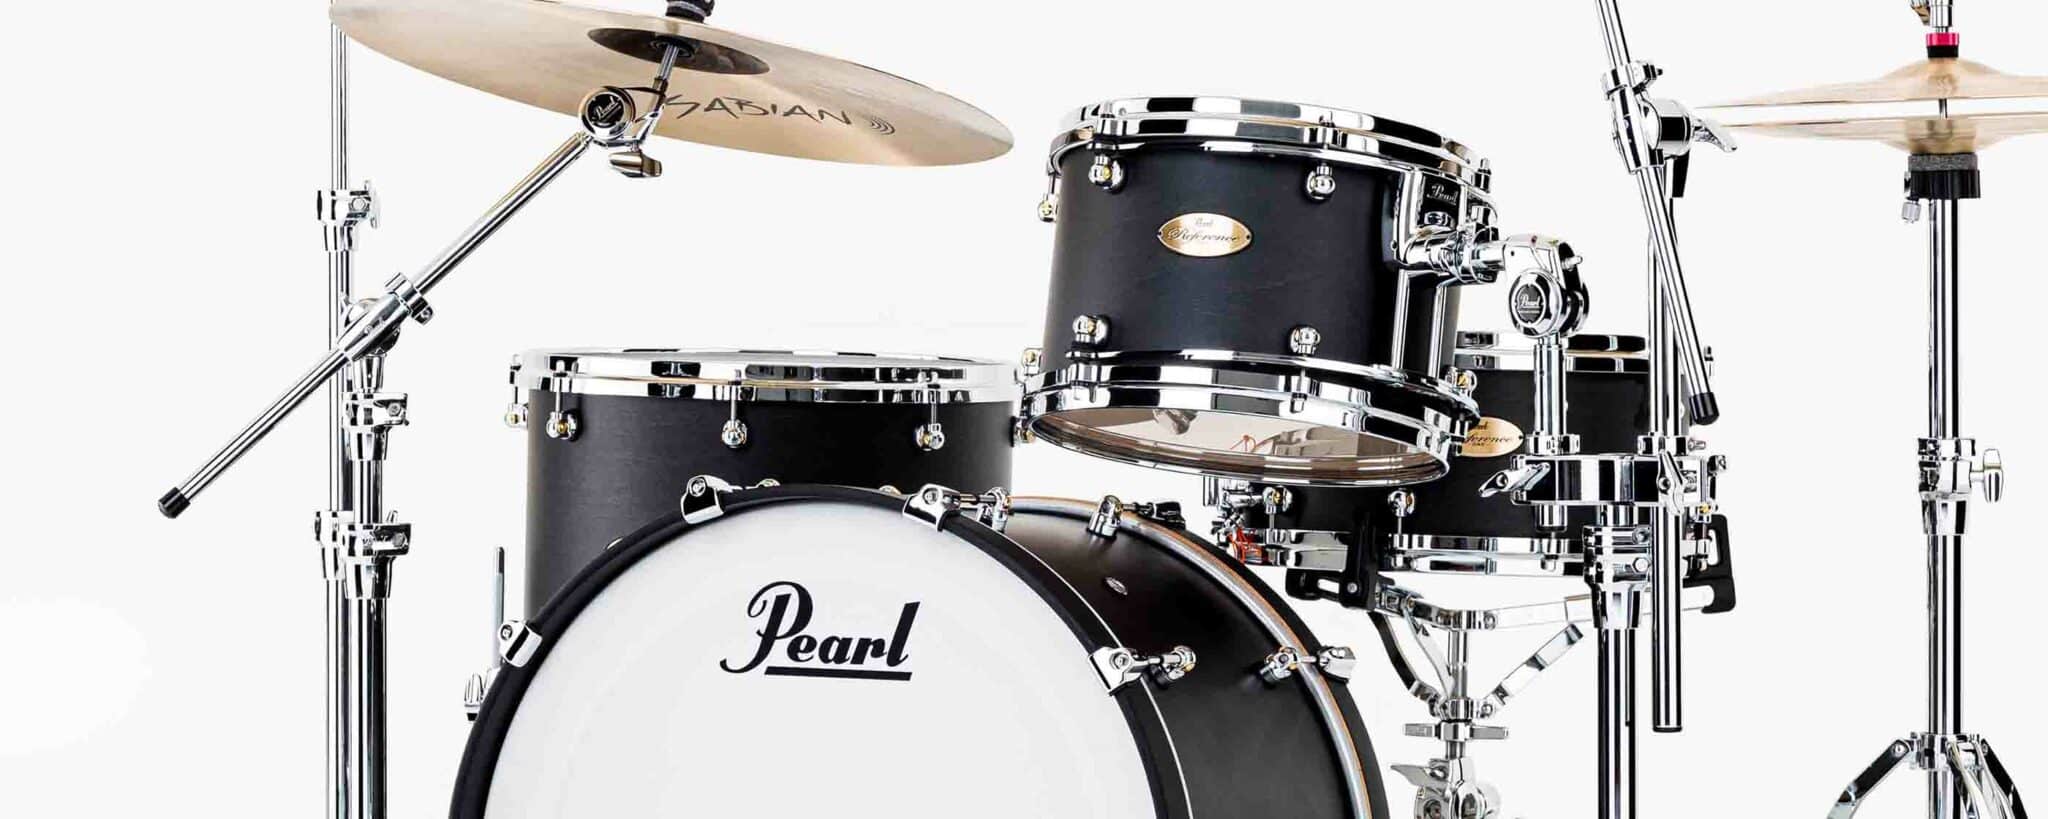 High End Reimagined - New Gear From Pearl Drums!